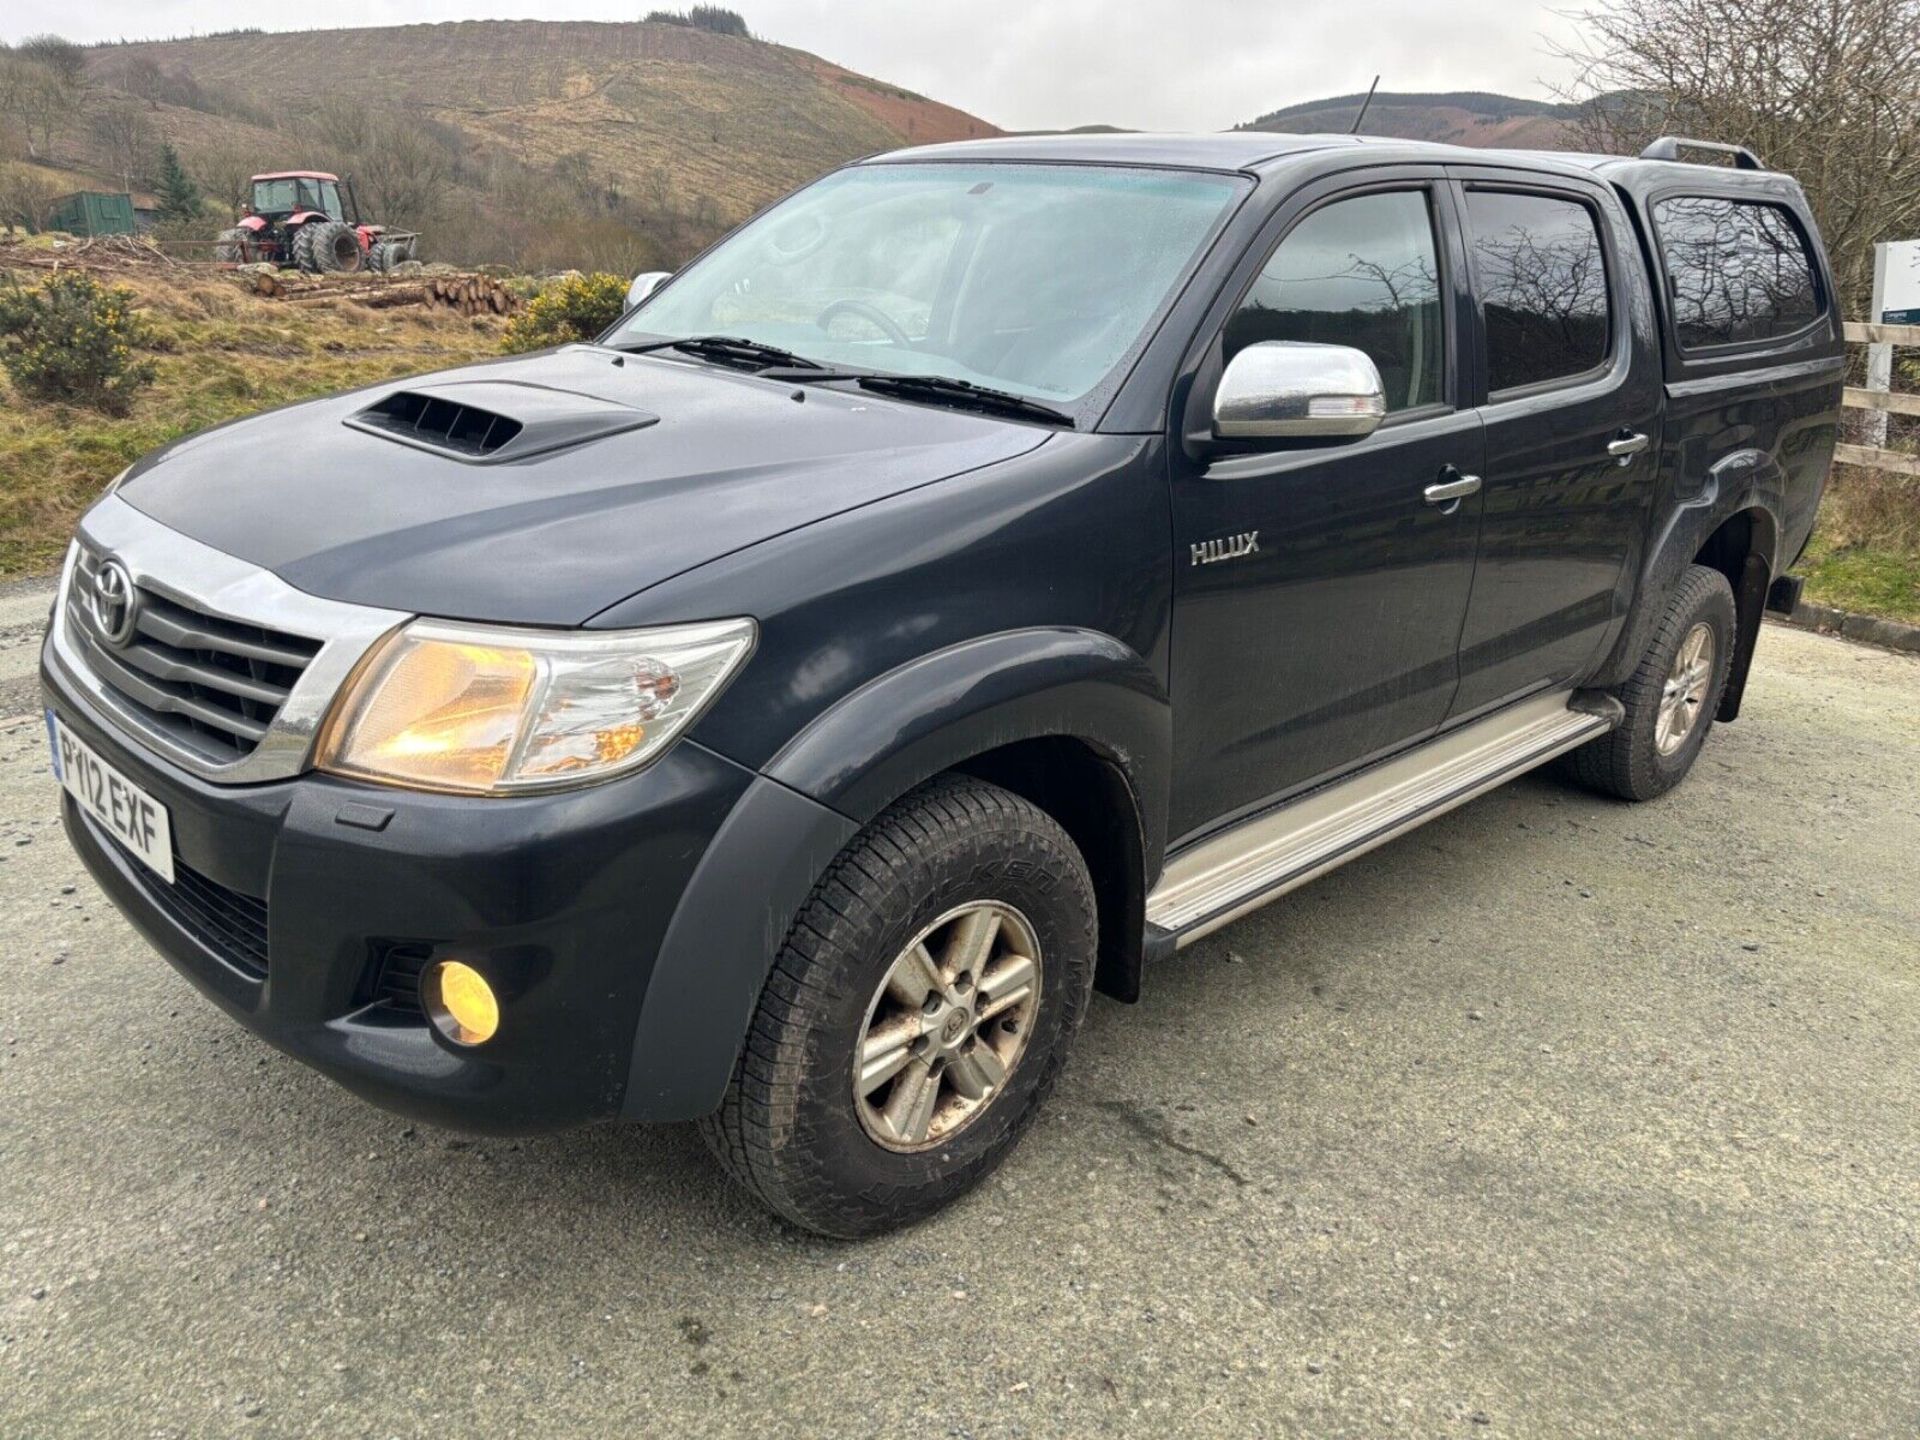 TOYOTA HILUX DOUBLE CAB PICKUP - Image 2 of 14